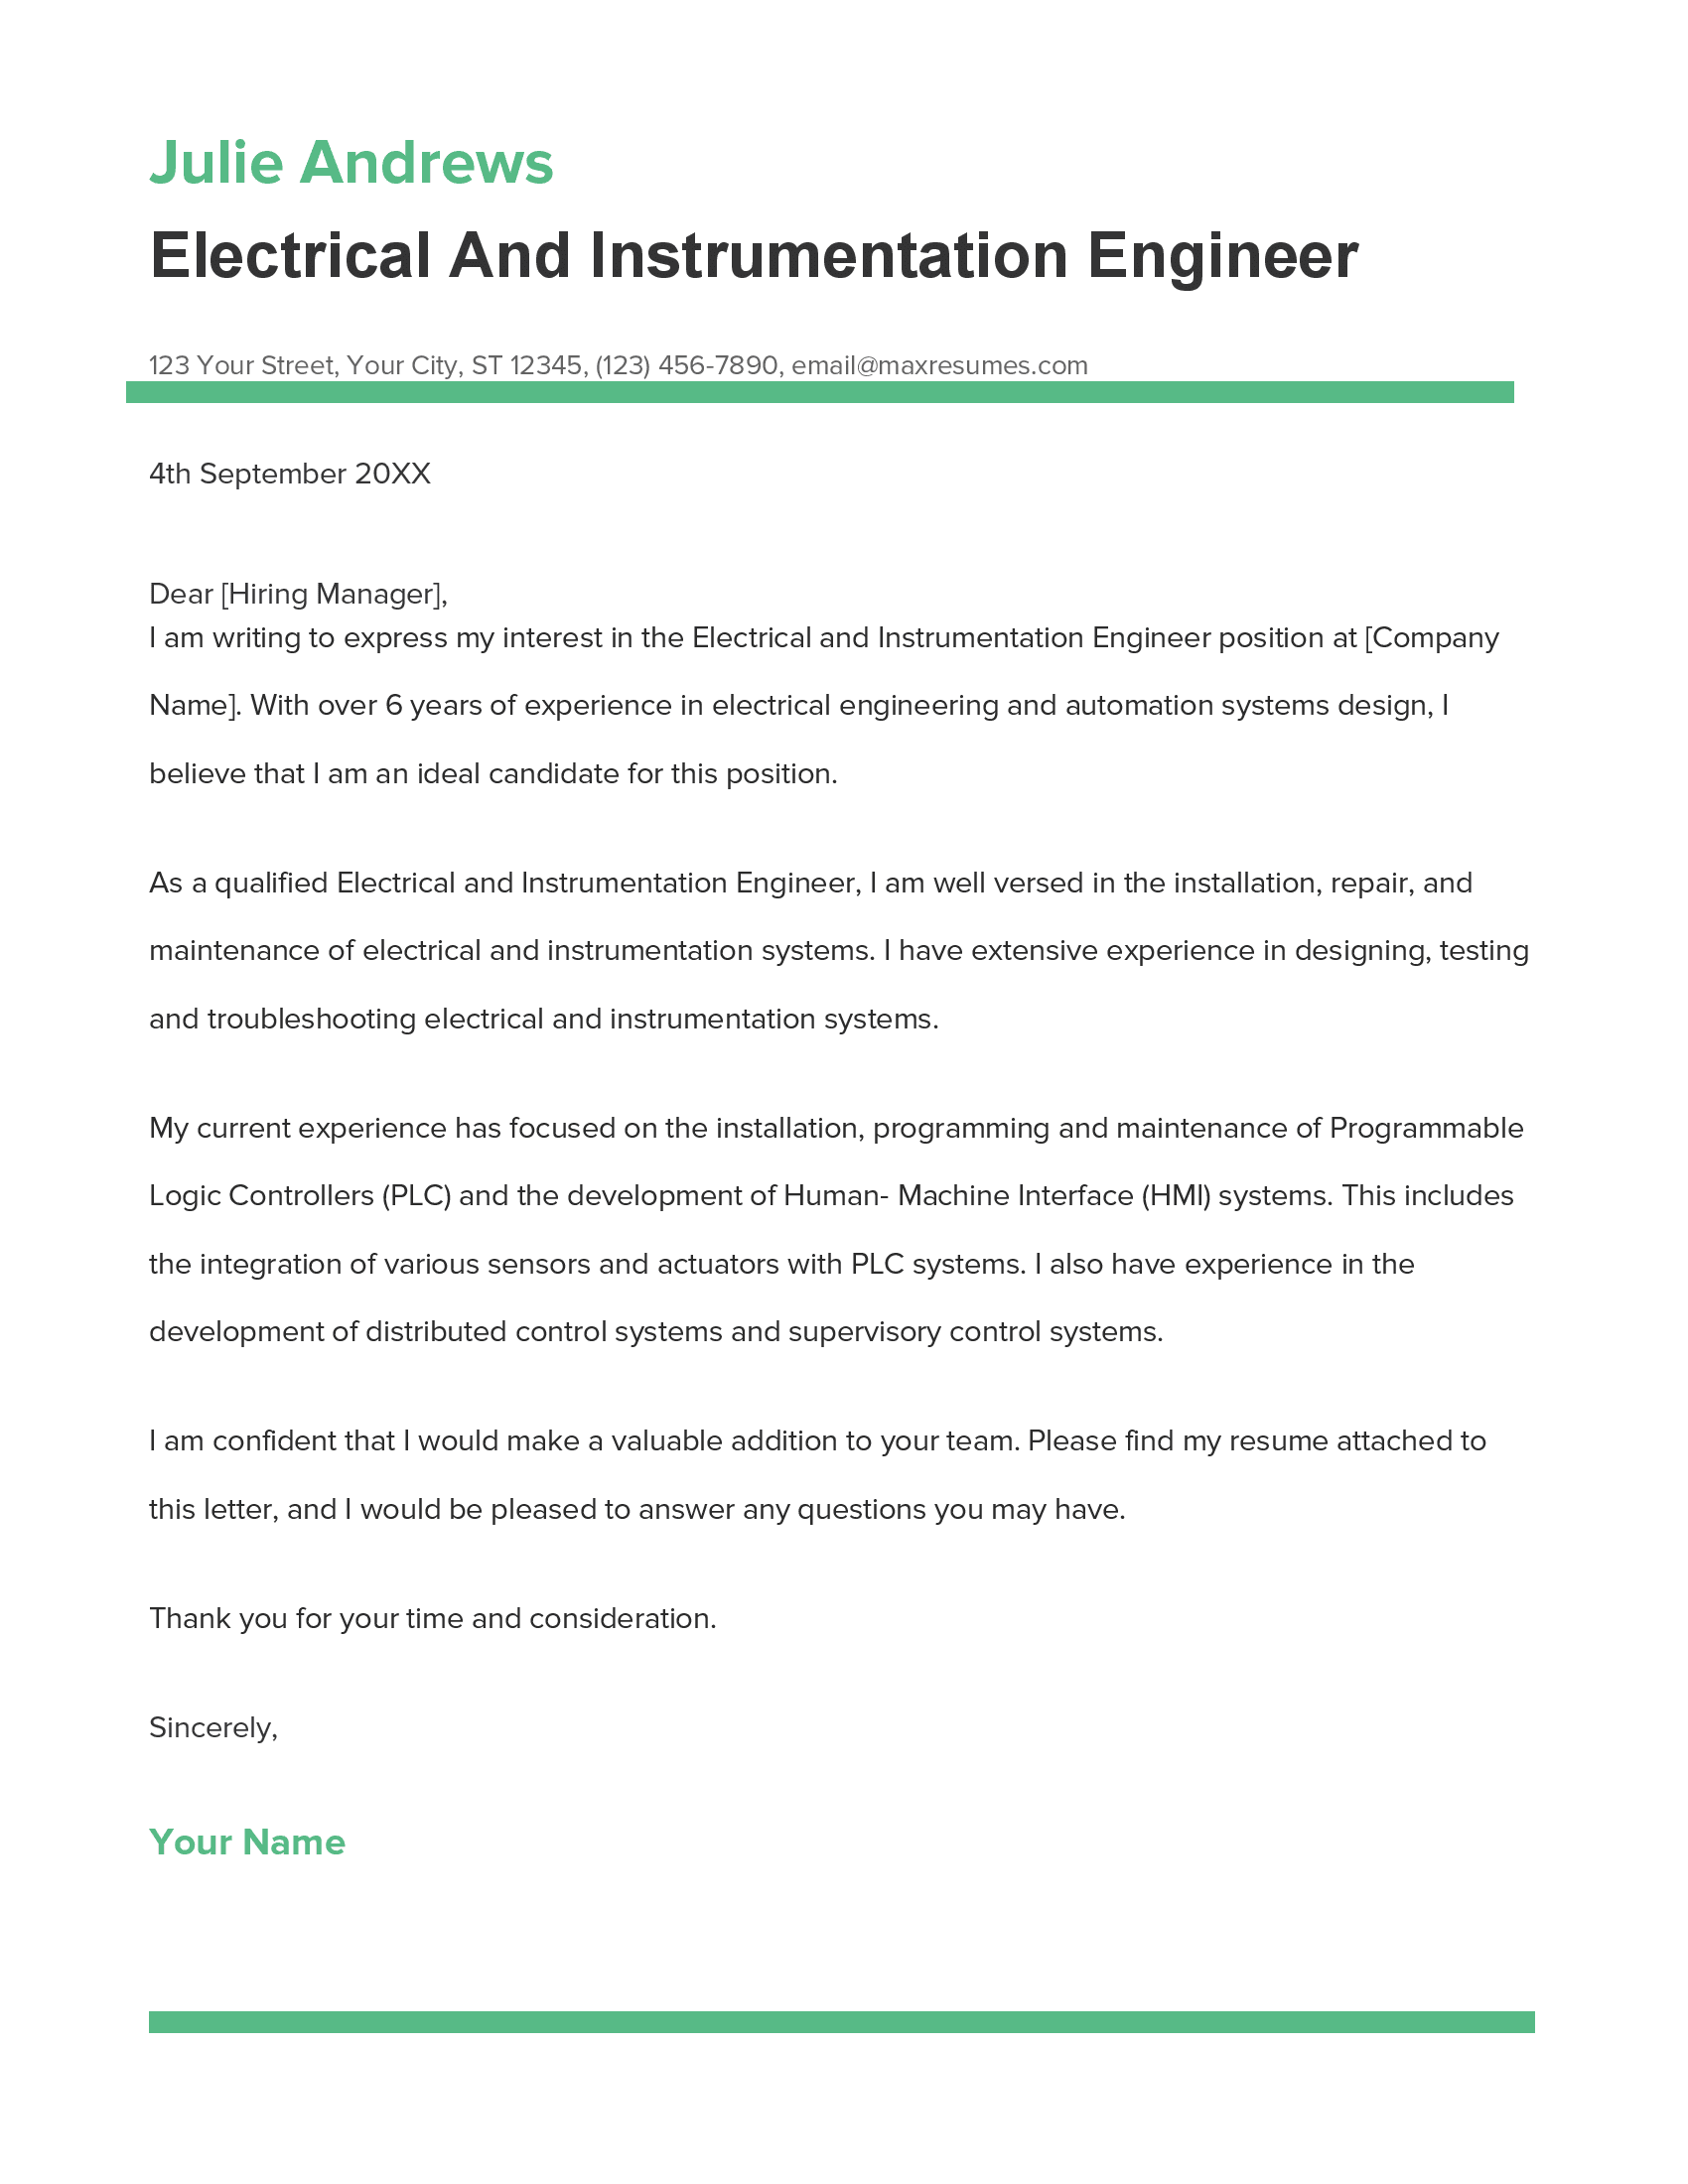 Electrical And Instrumentation Engineer Cover Letter Example